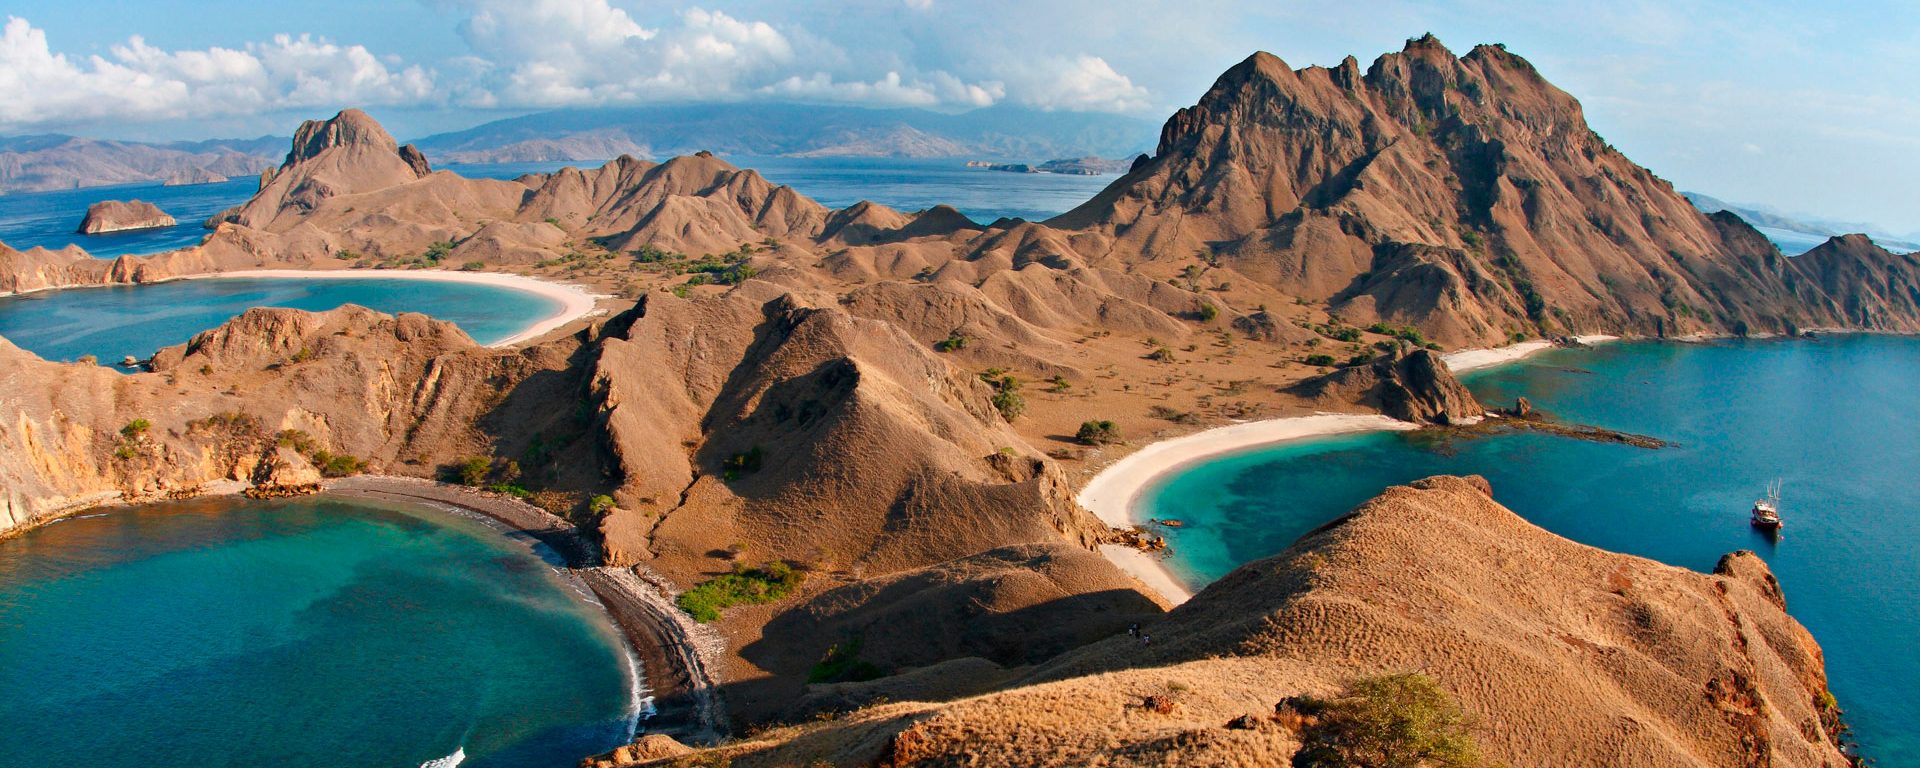 View from atop Padar Island in Komodo National Park, Indonesia